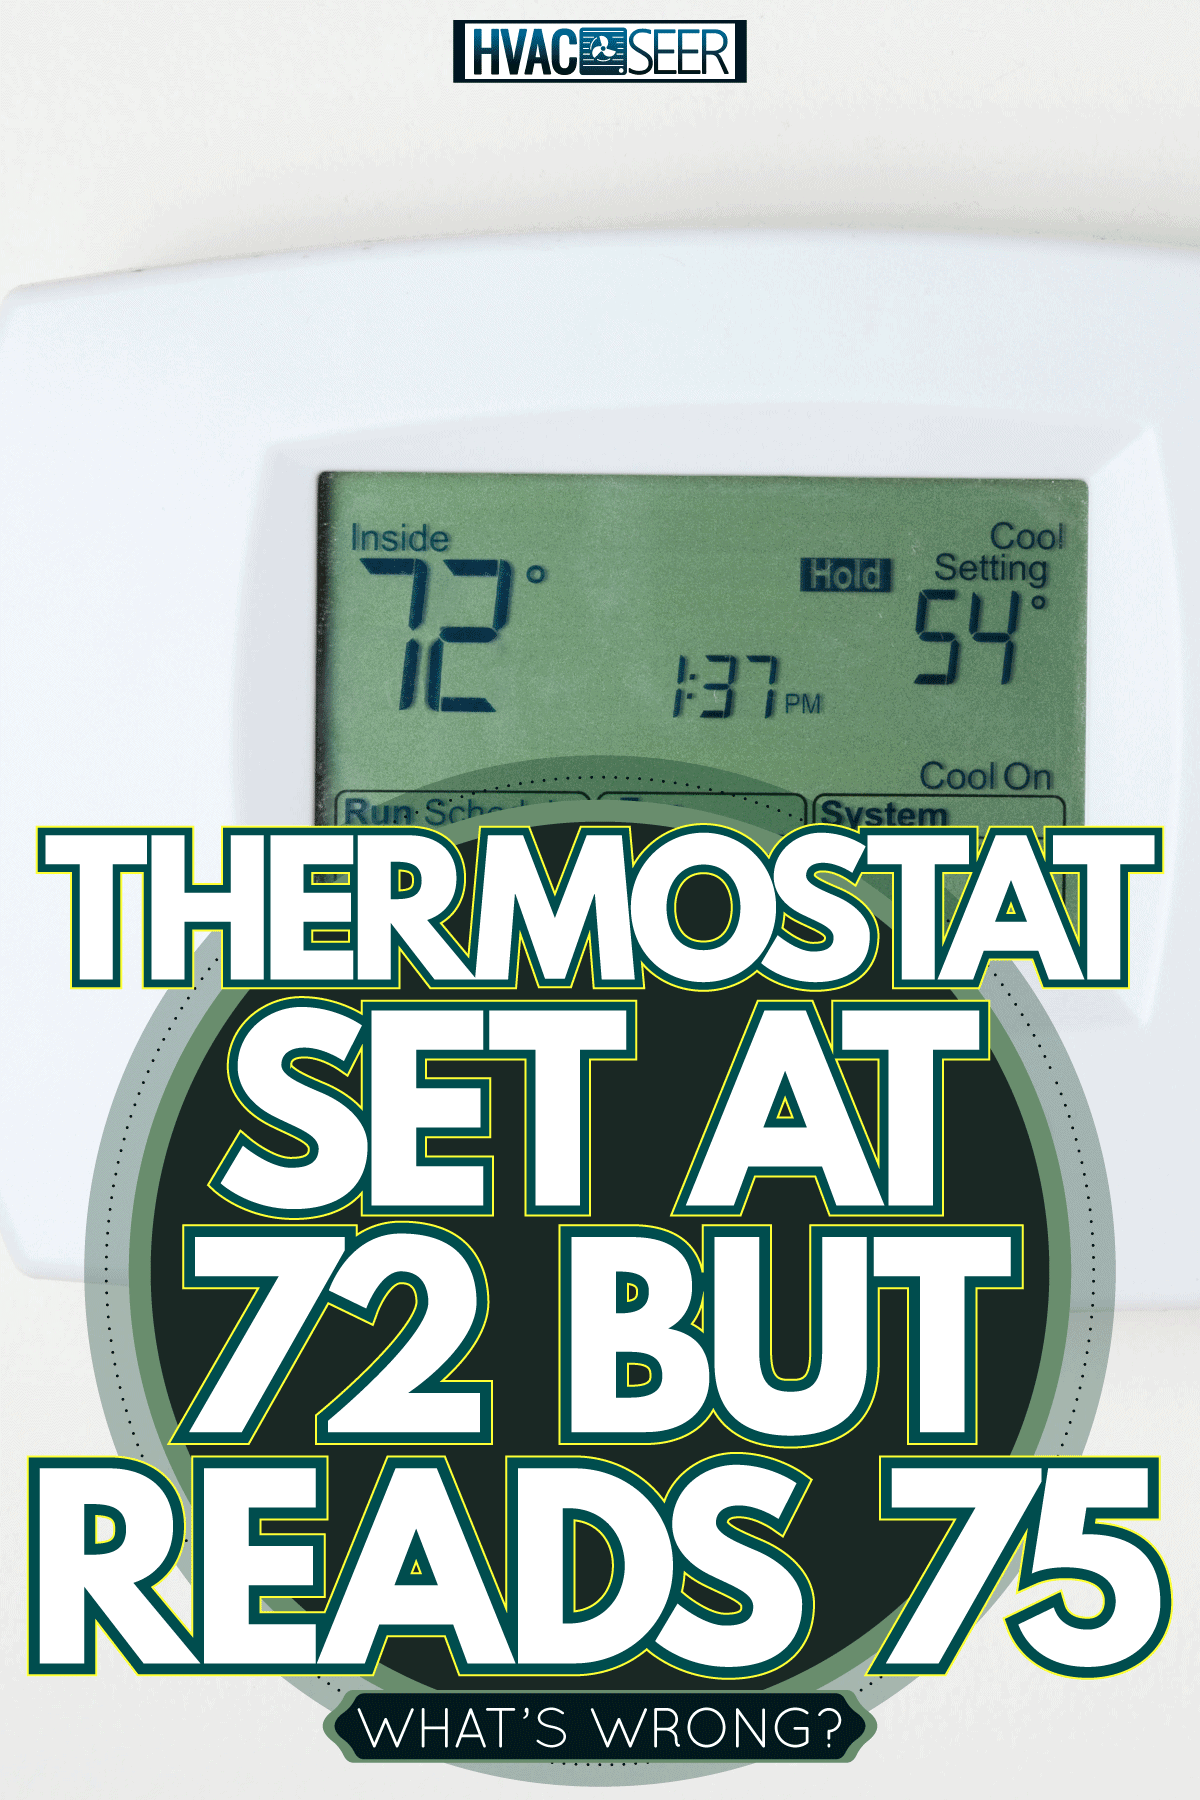 Man adjusting the thermostat level for the living room, Thermostat Set At 72 But Reads 75 - What's Wrong?